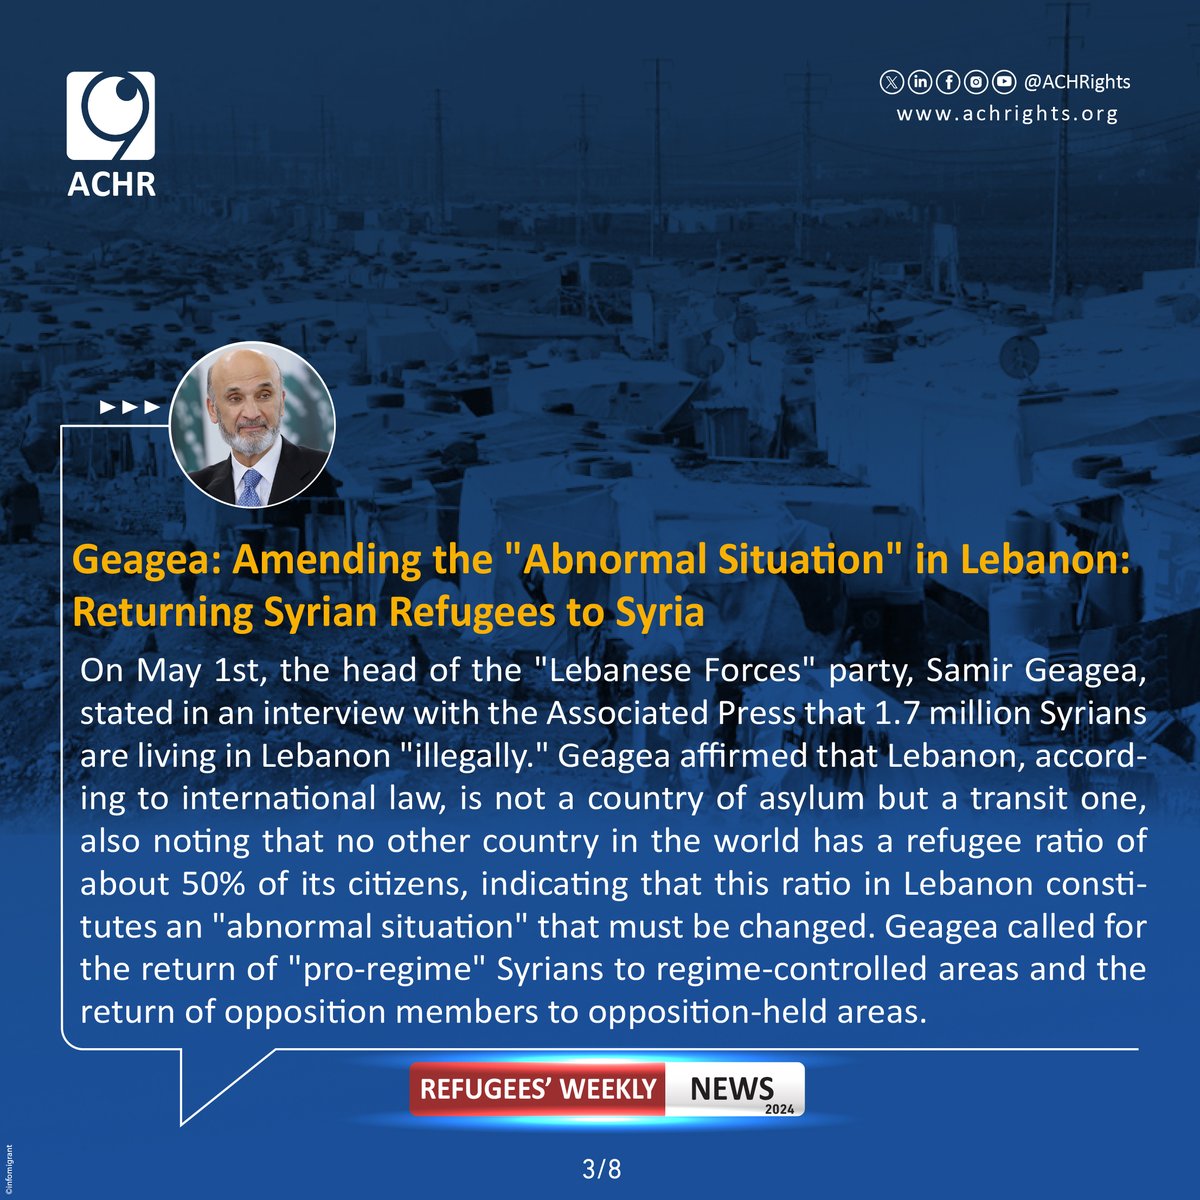 Geagea: Amending the 'Abnormal Situation' in Lebanon: Returning Syrian Refugees to Syria.
#Together_for_Human_Rights #weeklynews #violations #humanrights #syrianrefugees #lebanon #syria #RefugeesRight